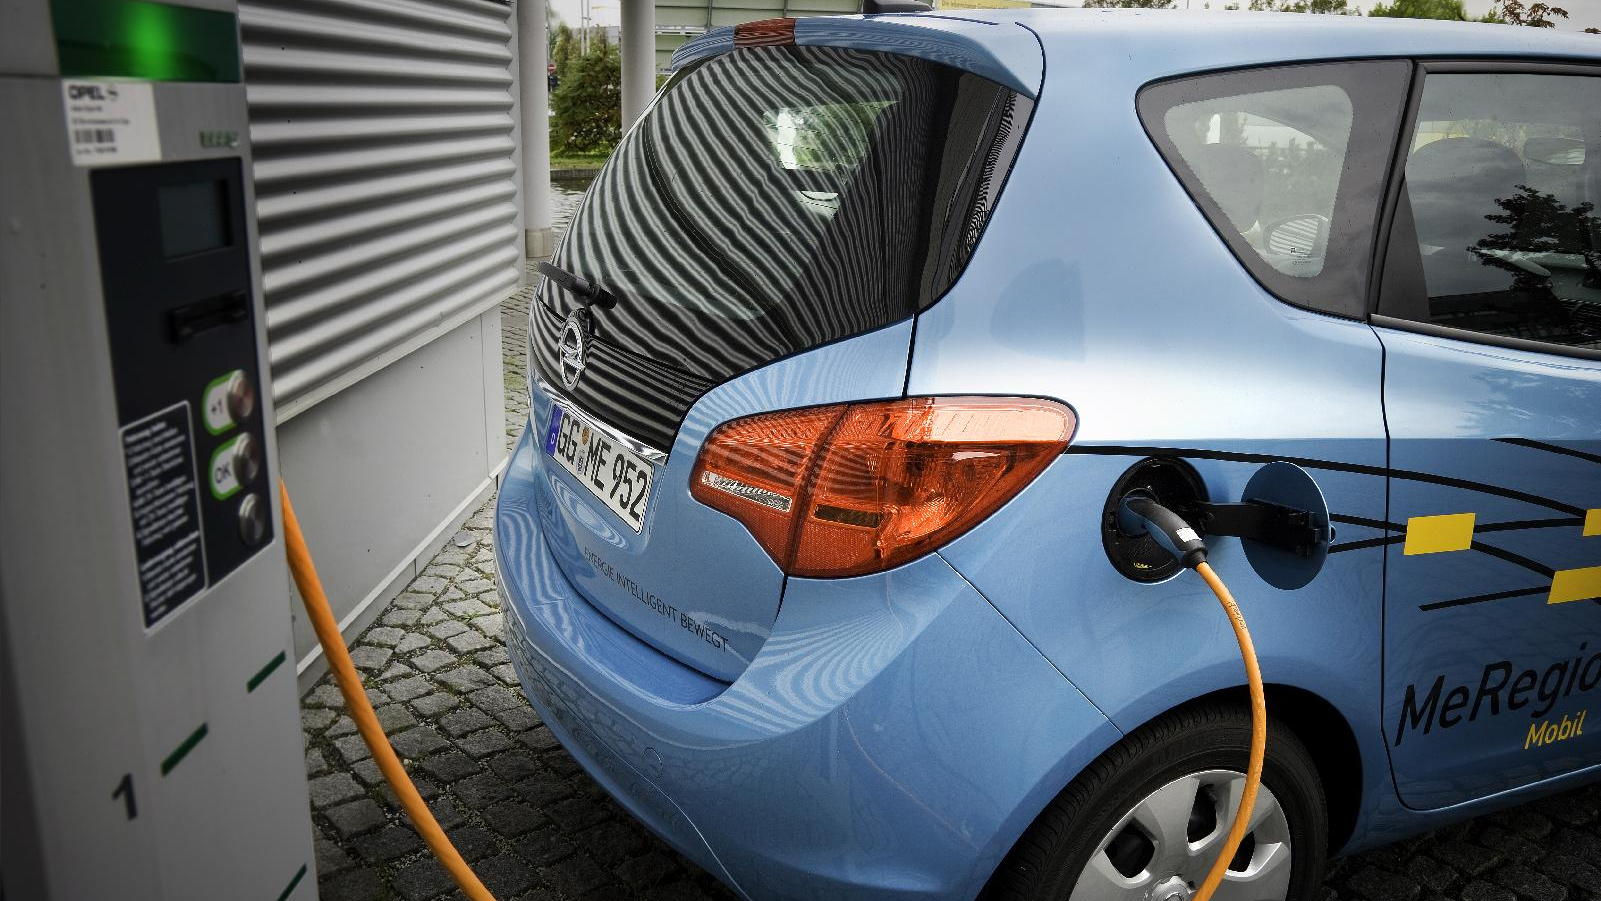 Opel Meriva electric vehicle, to be tested in Germany as part of MeRegioMobil program, 2010-2011